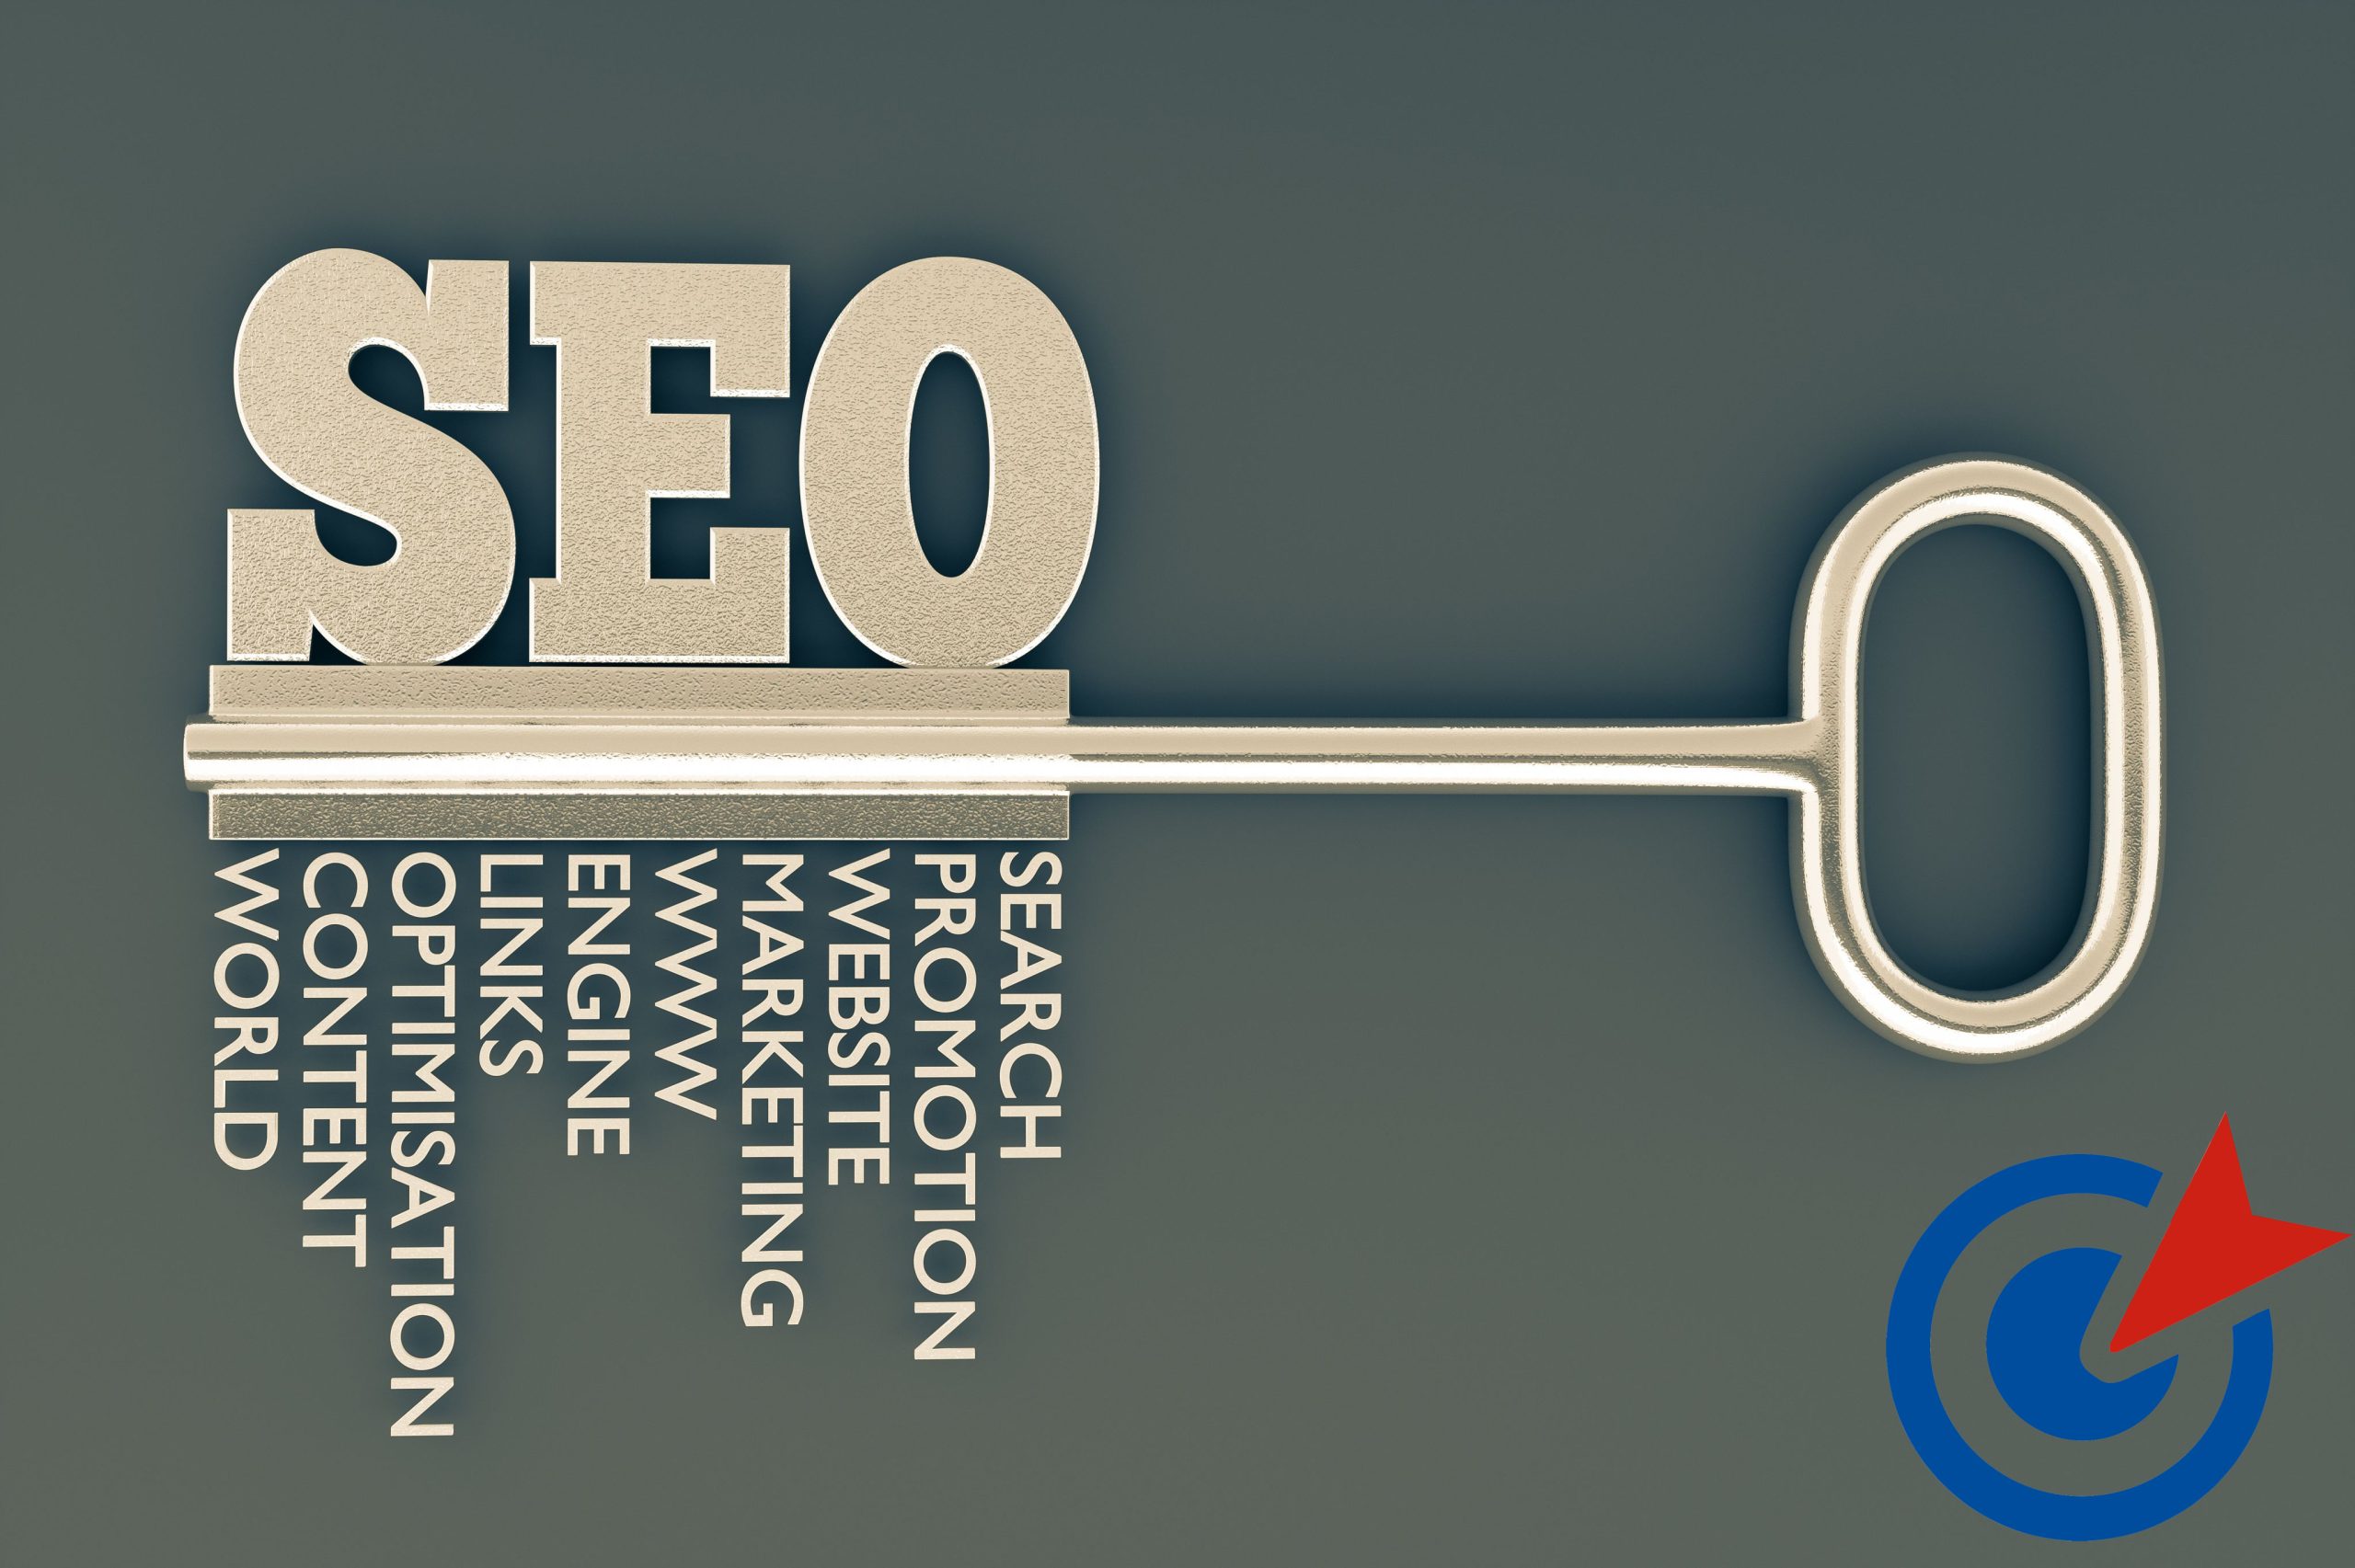 Don't Miss Out On All That Search Engine Optimization Has To Offer